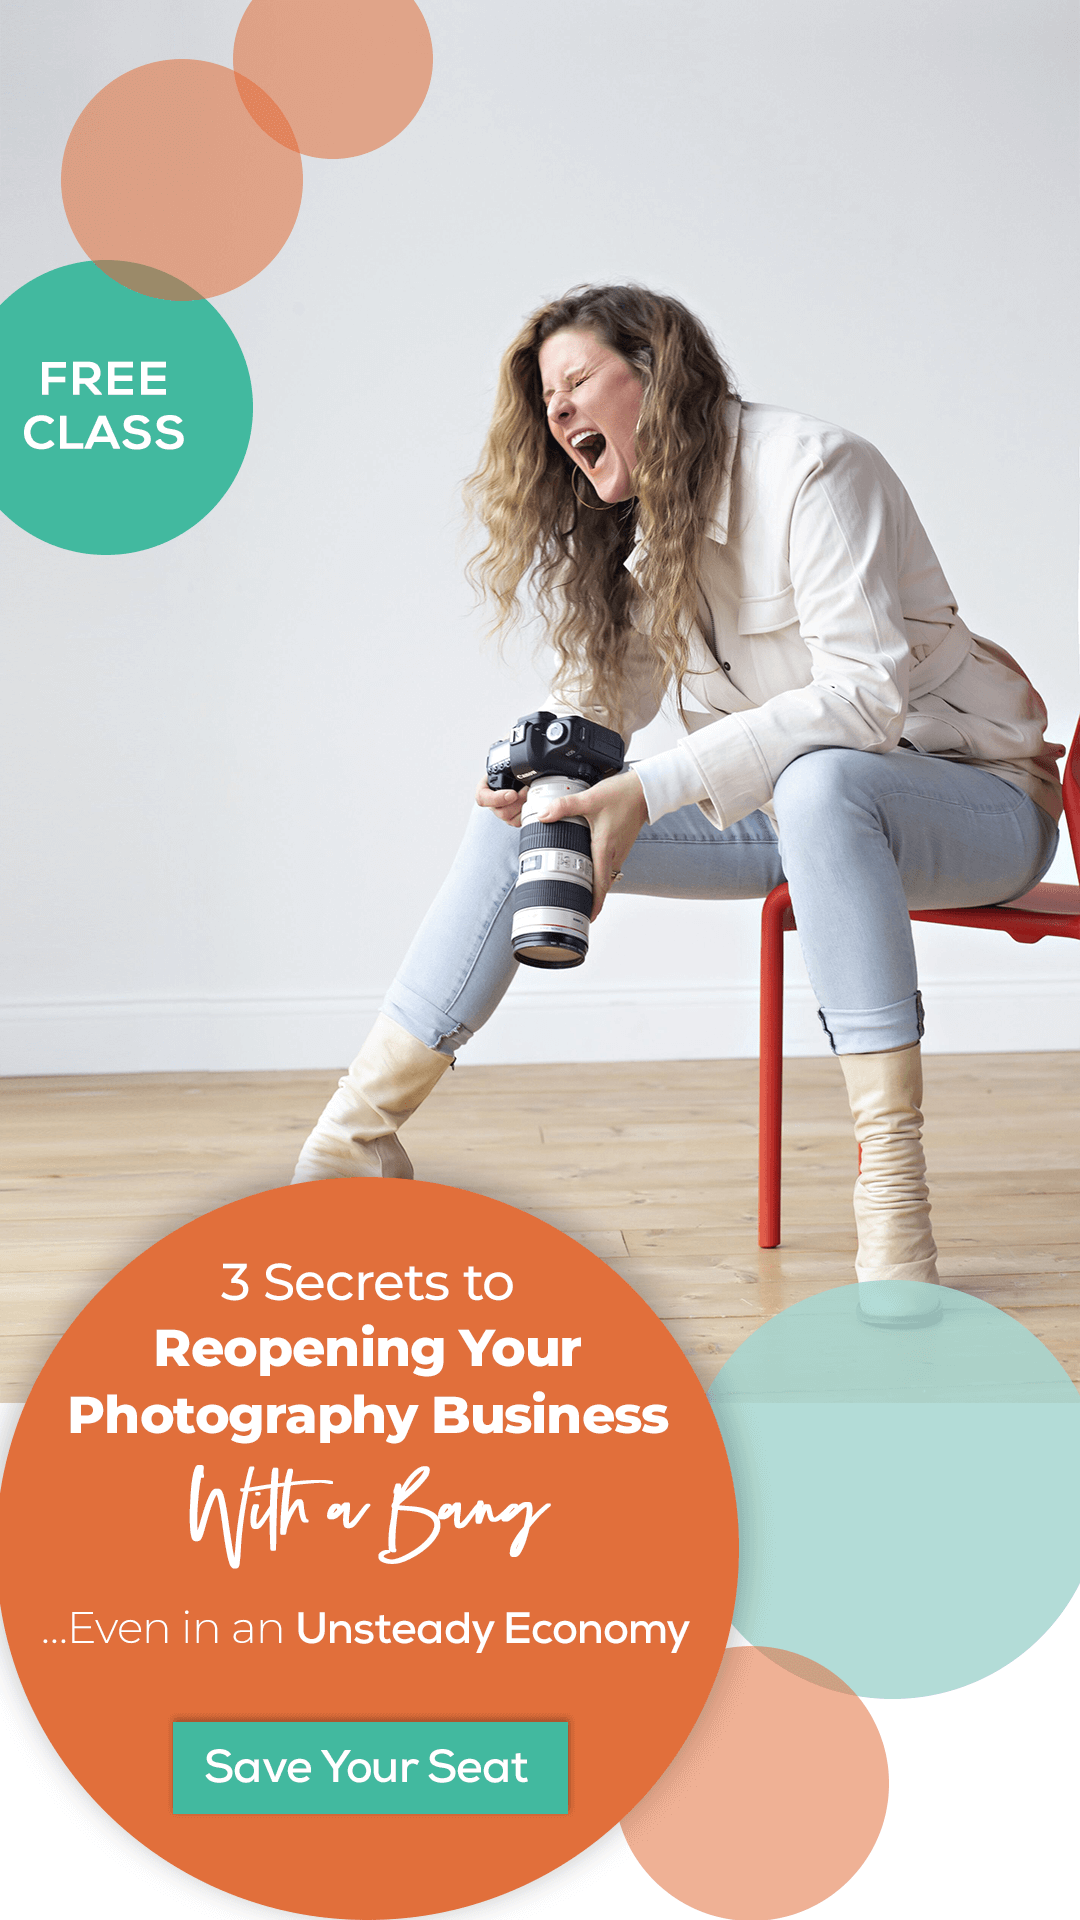 10 Best Photography Marketing Ideas to Grow Your Business